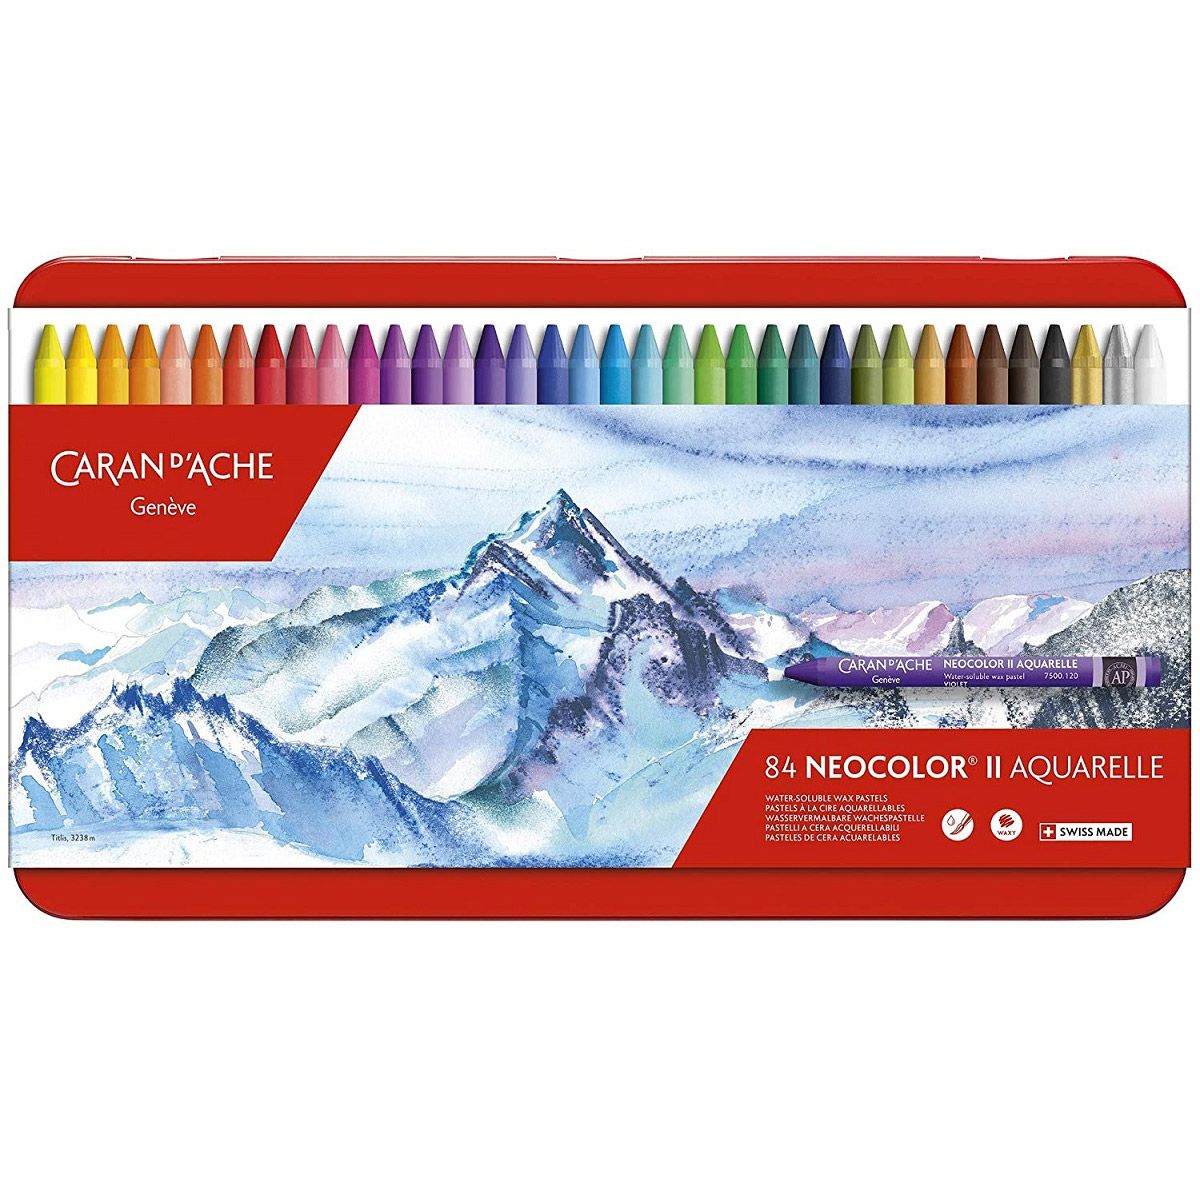 Caran d'Ache Classic Neocolor II Water-Soluble Pastel Set of 84